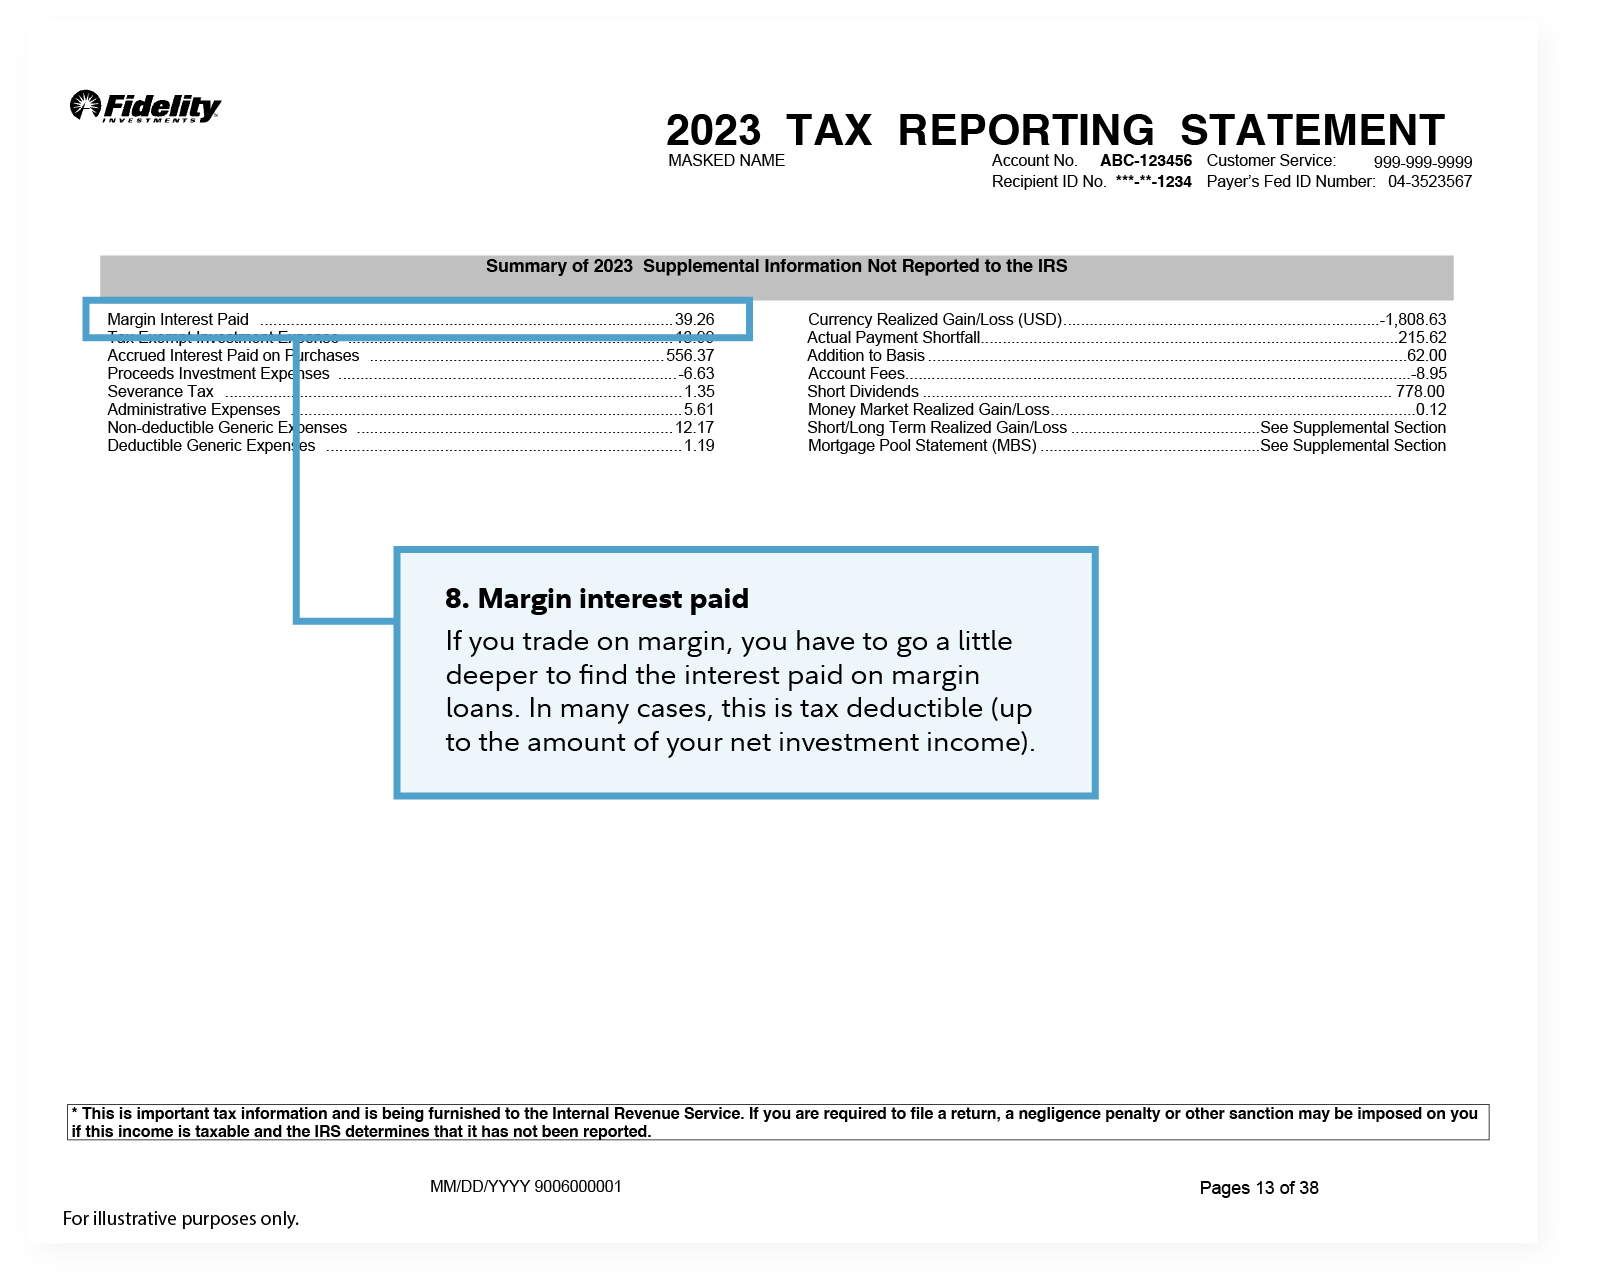 Last page of 2023 Fidelity 1099 form. Provides supplemental information not reported to IRS